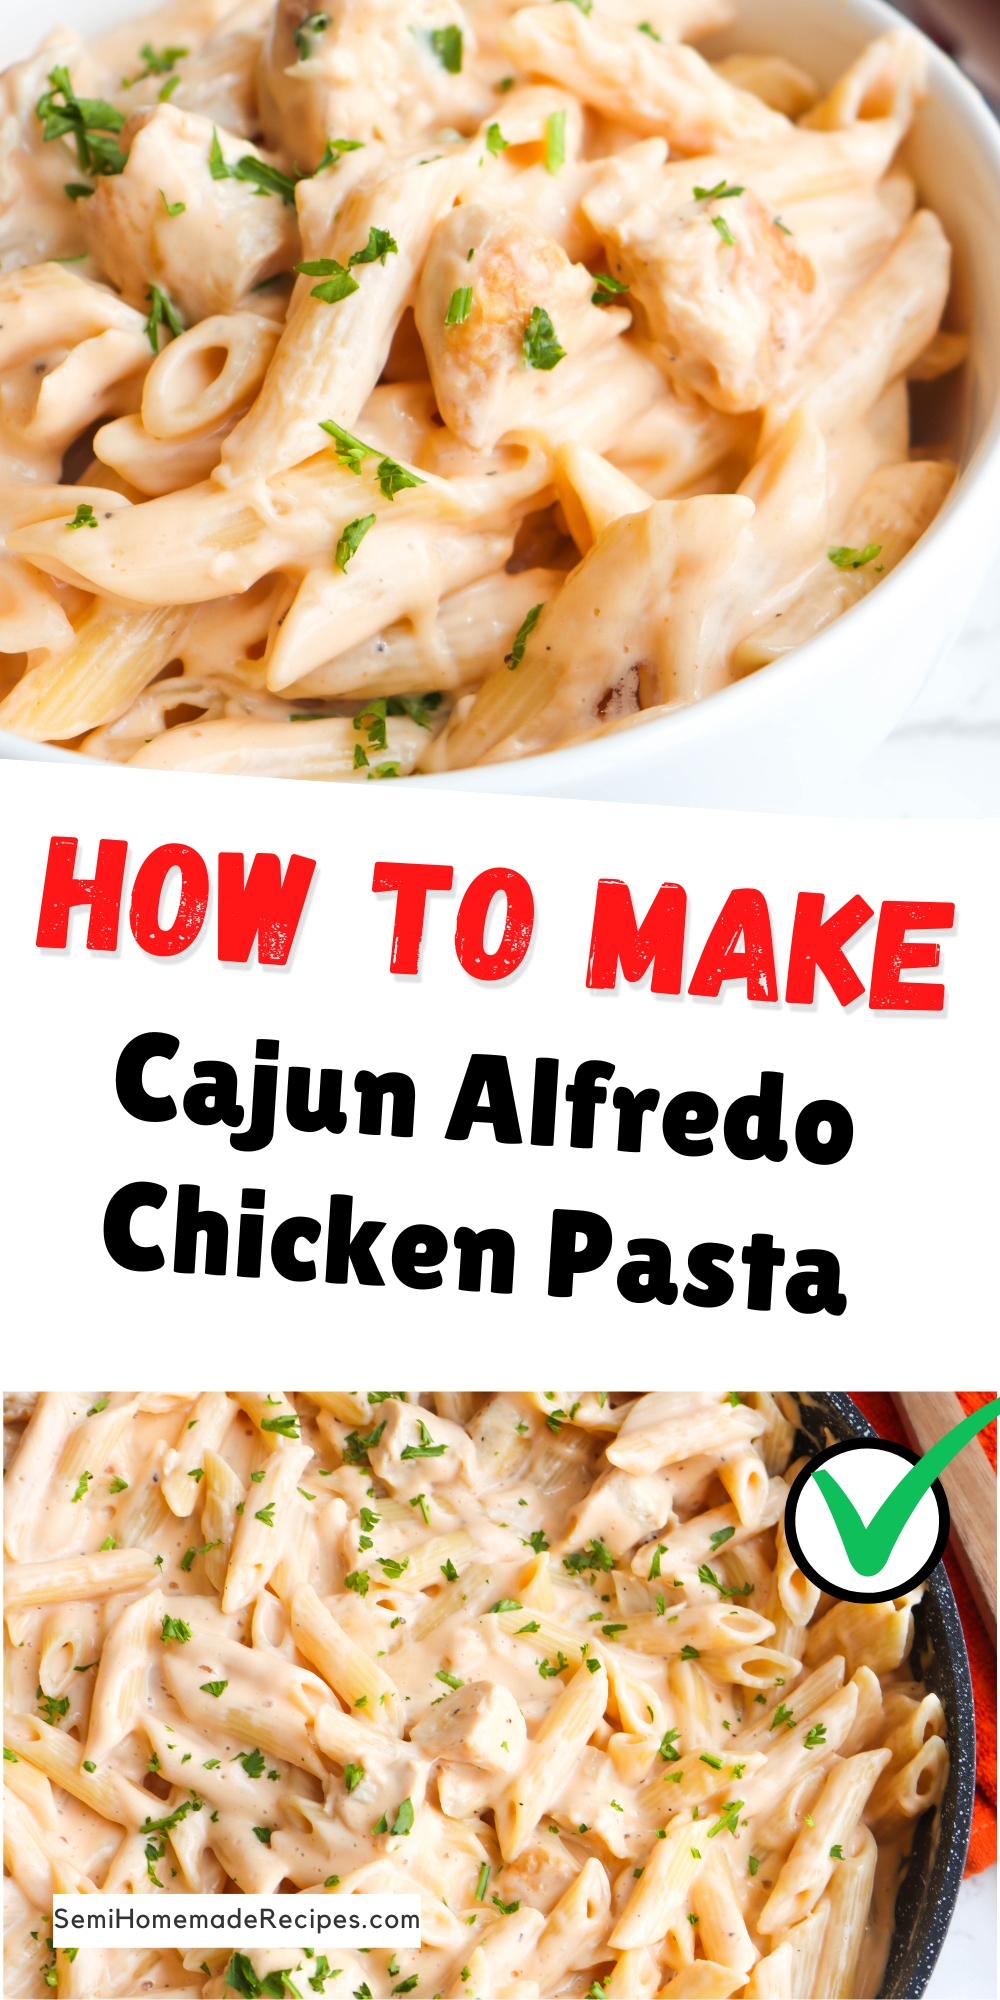 Pressed for time? Learn the quick and easy way to whip up a delicious Cajun Alfredo Chicken Pasta in just 30 minutes. Say goodbye to boring weeknight dinners!